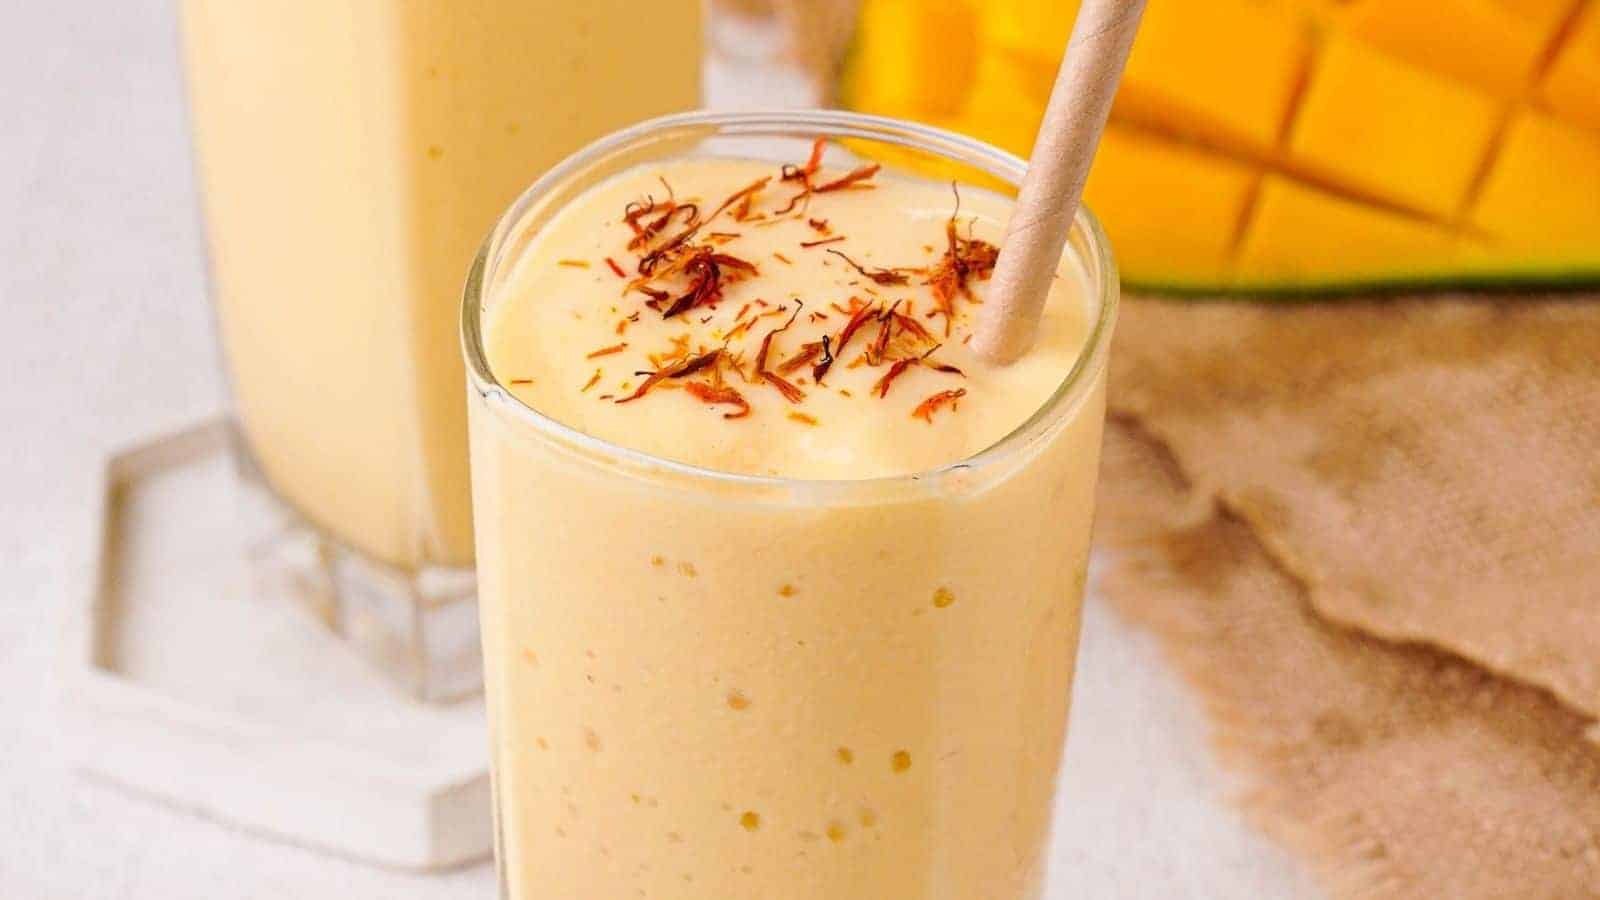 A close up image of mango lassi in a glass with straw.